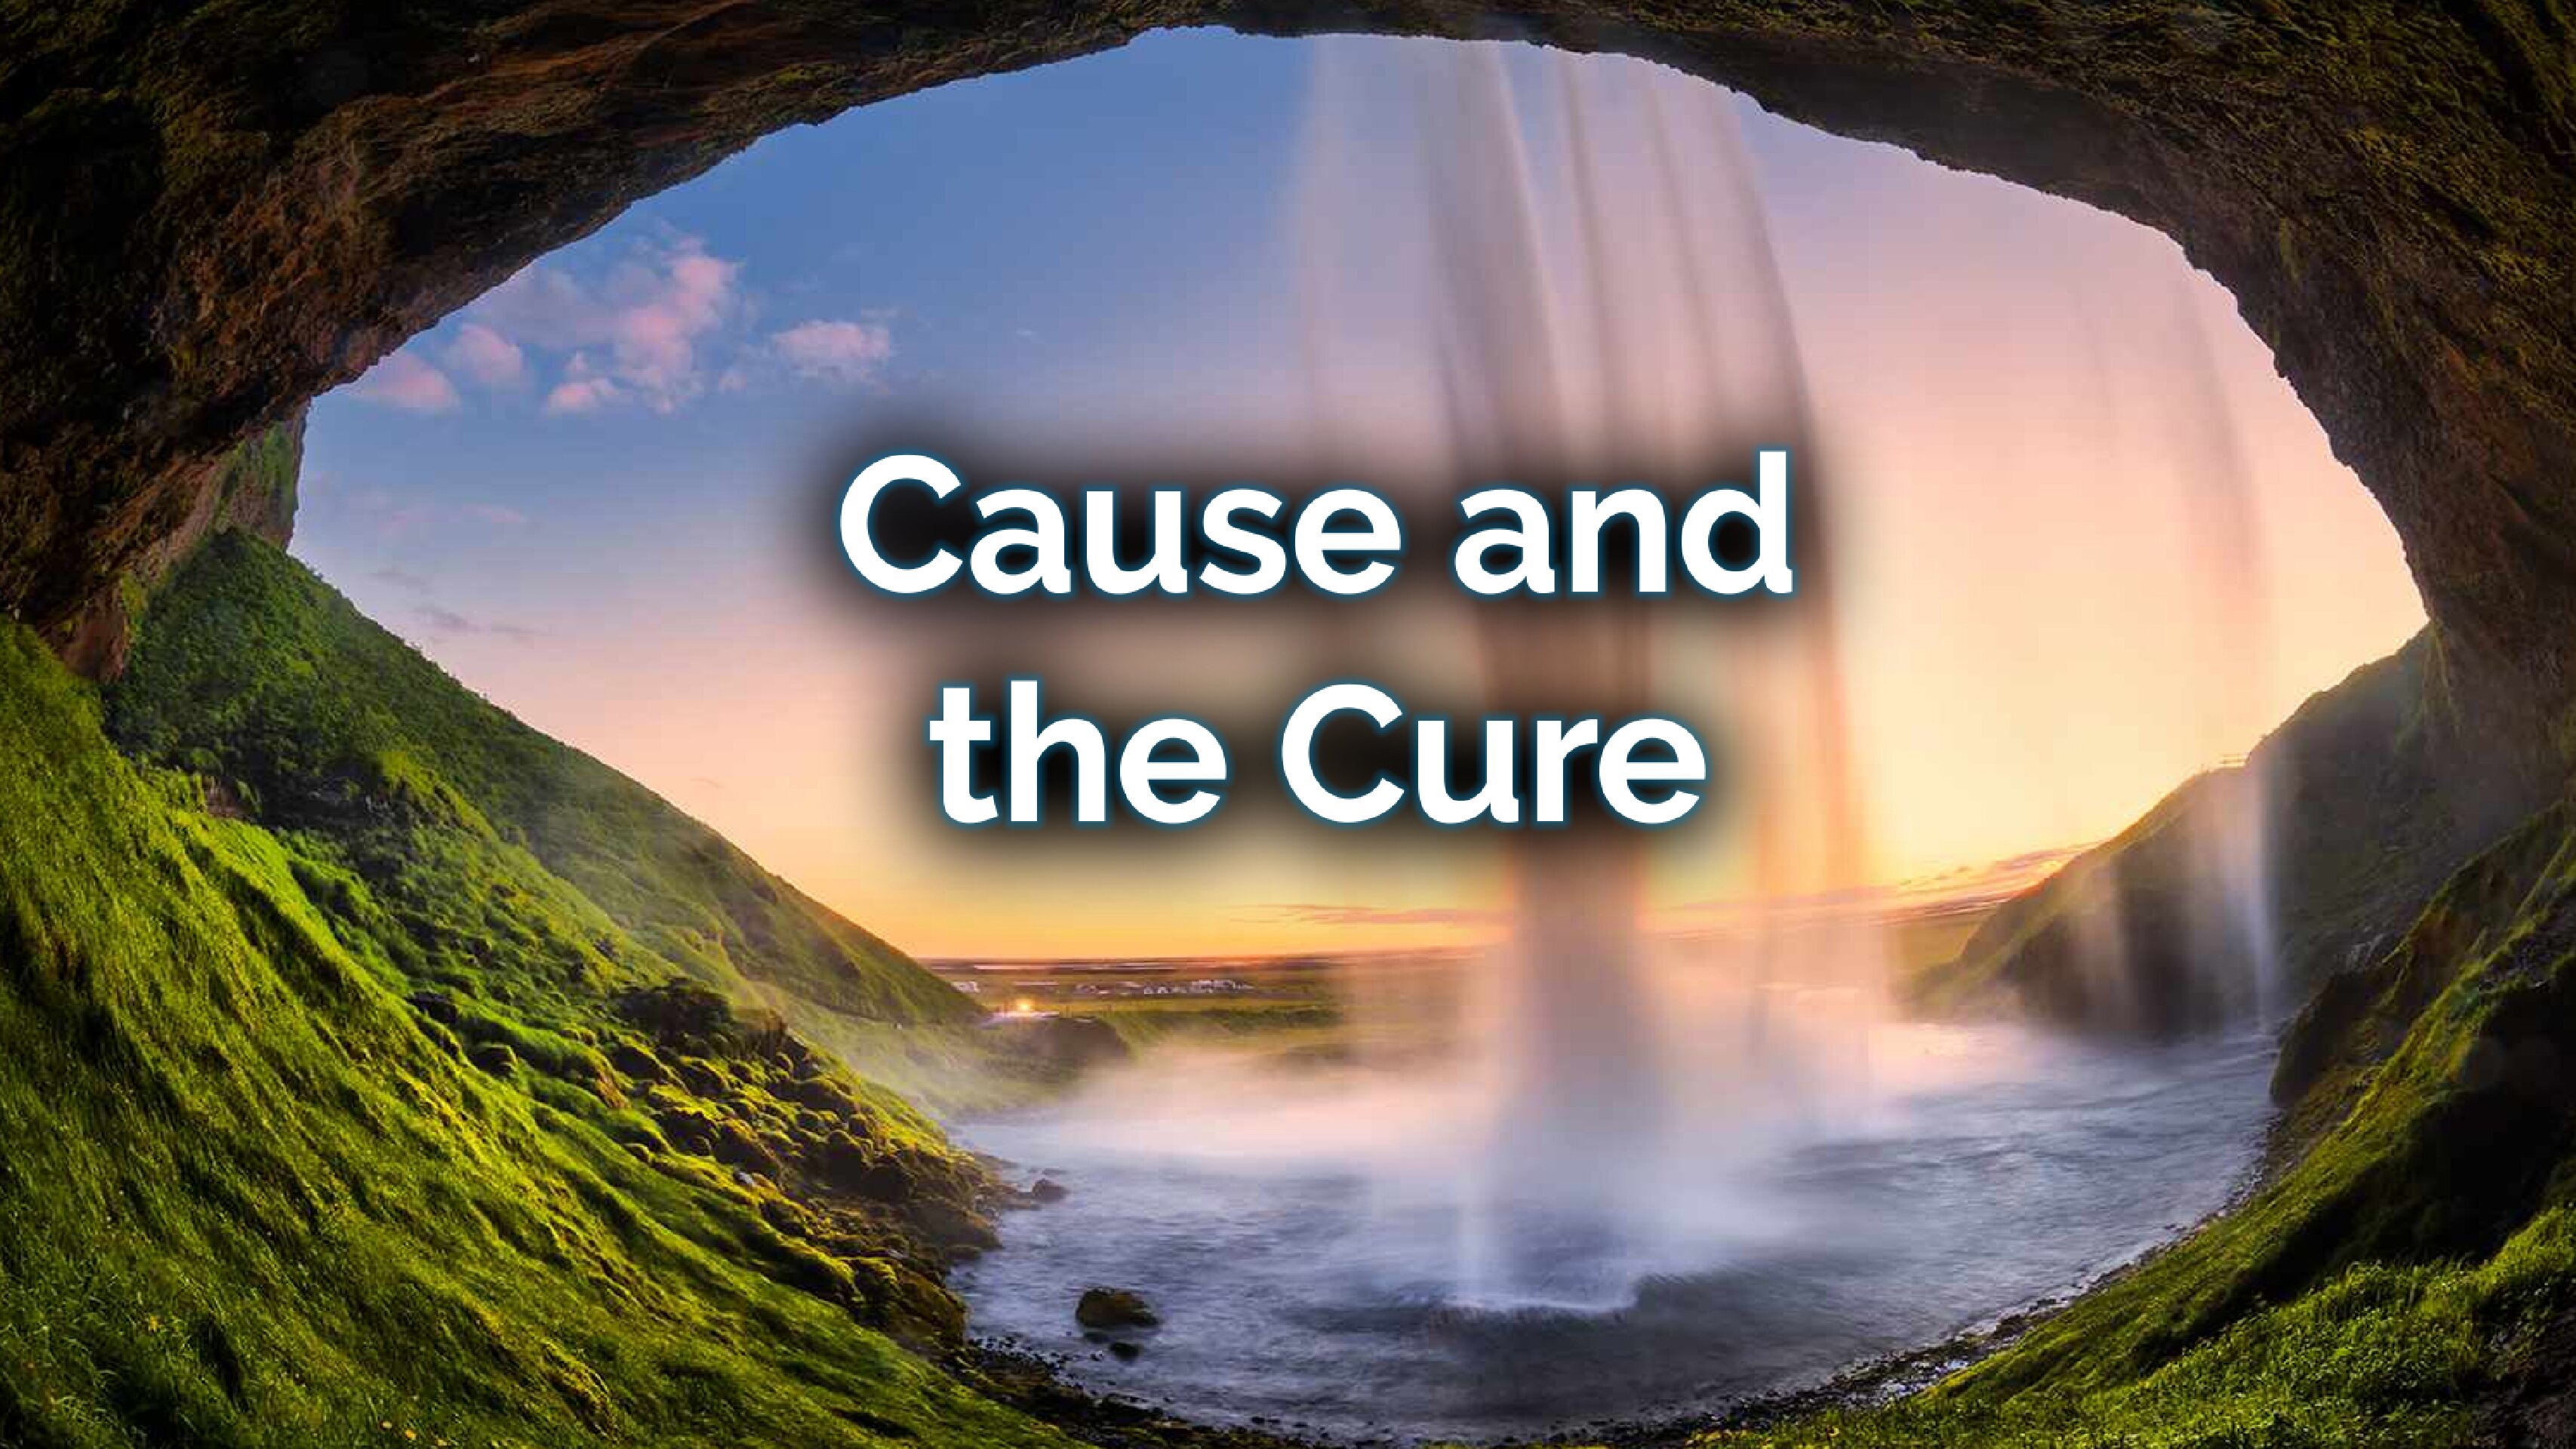 Cause and the Cure